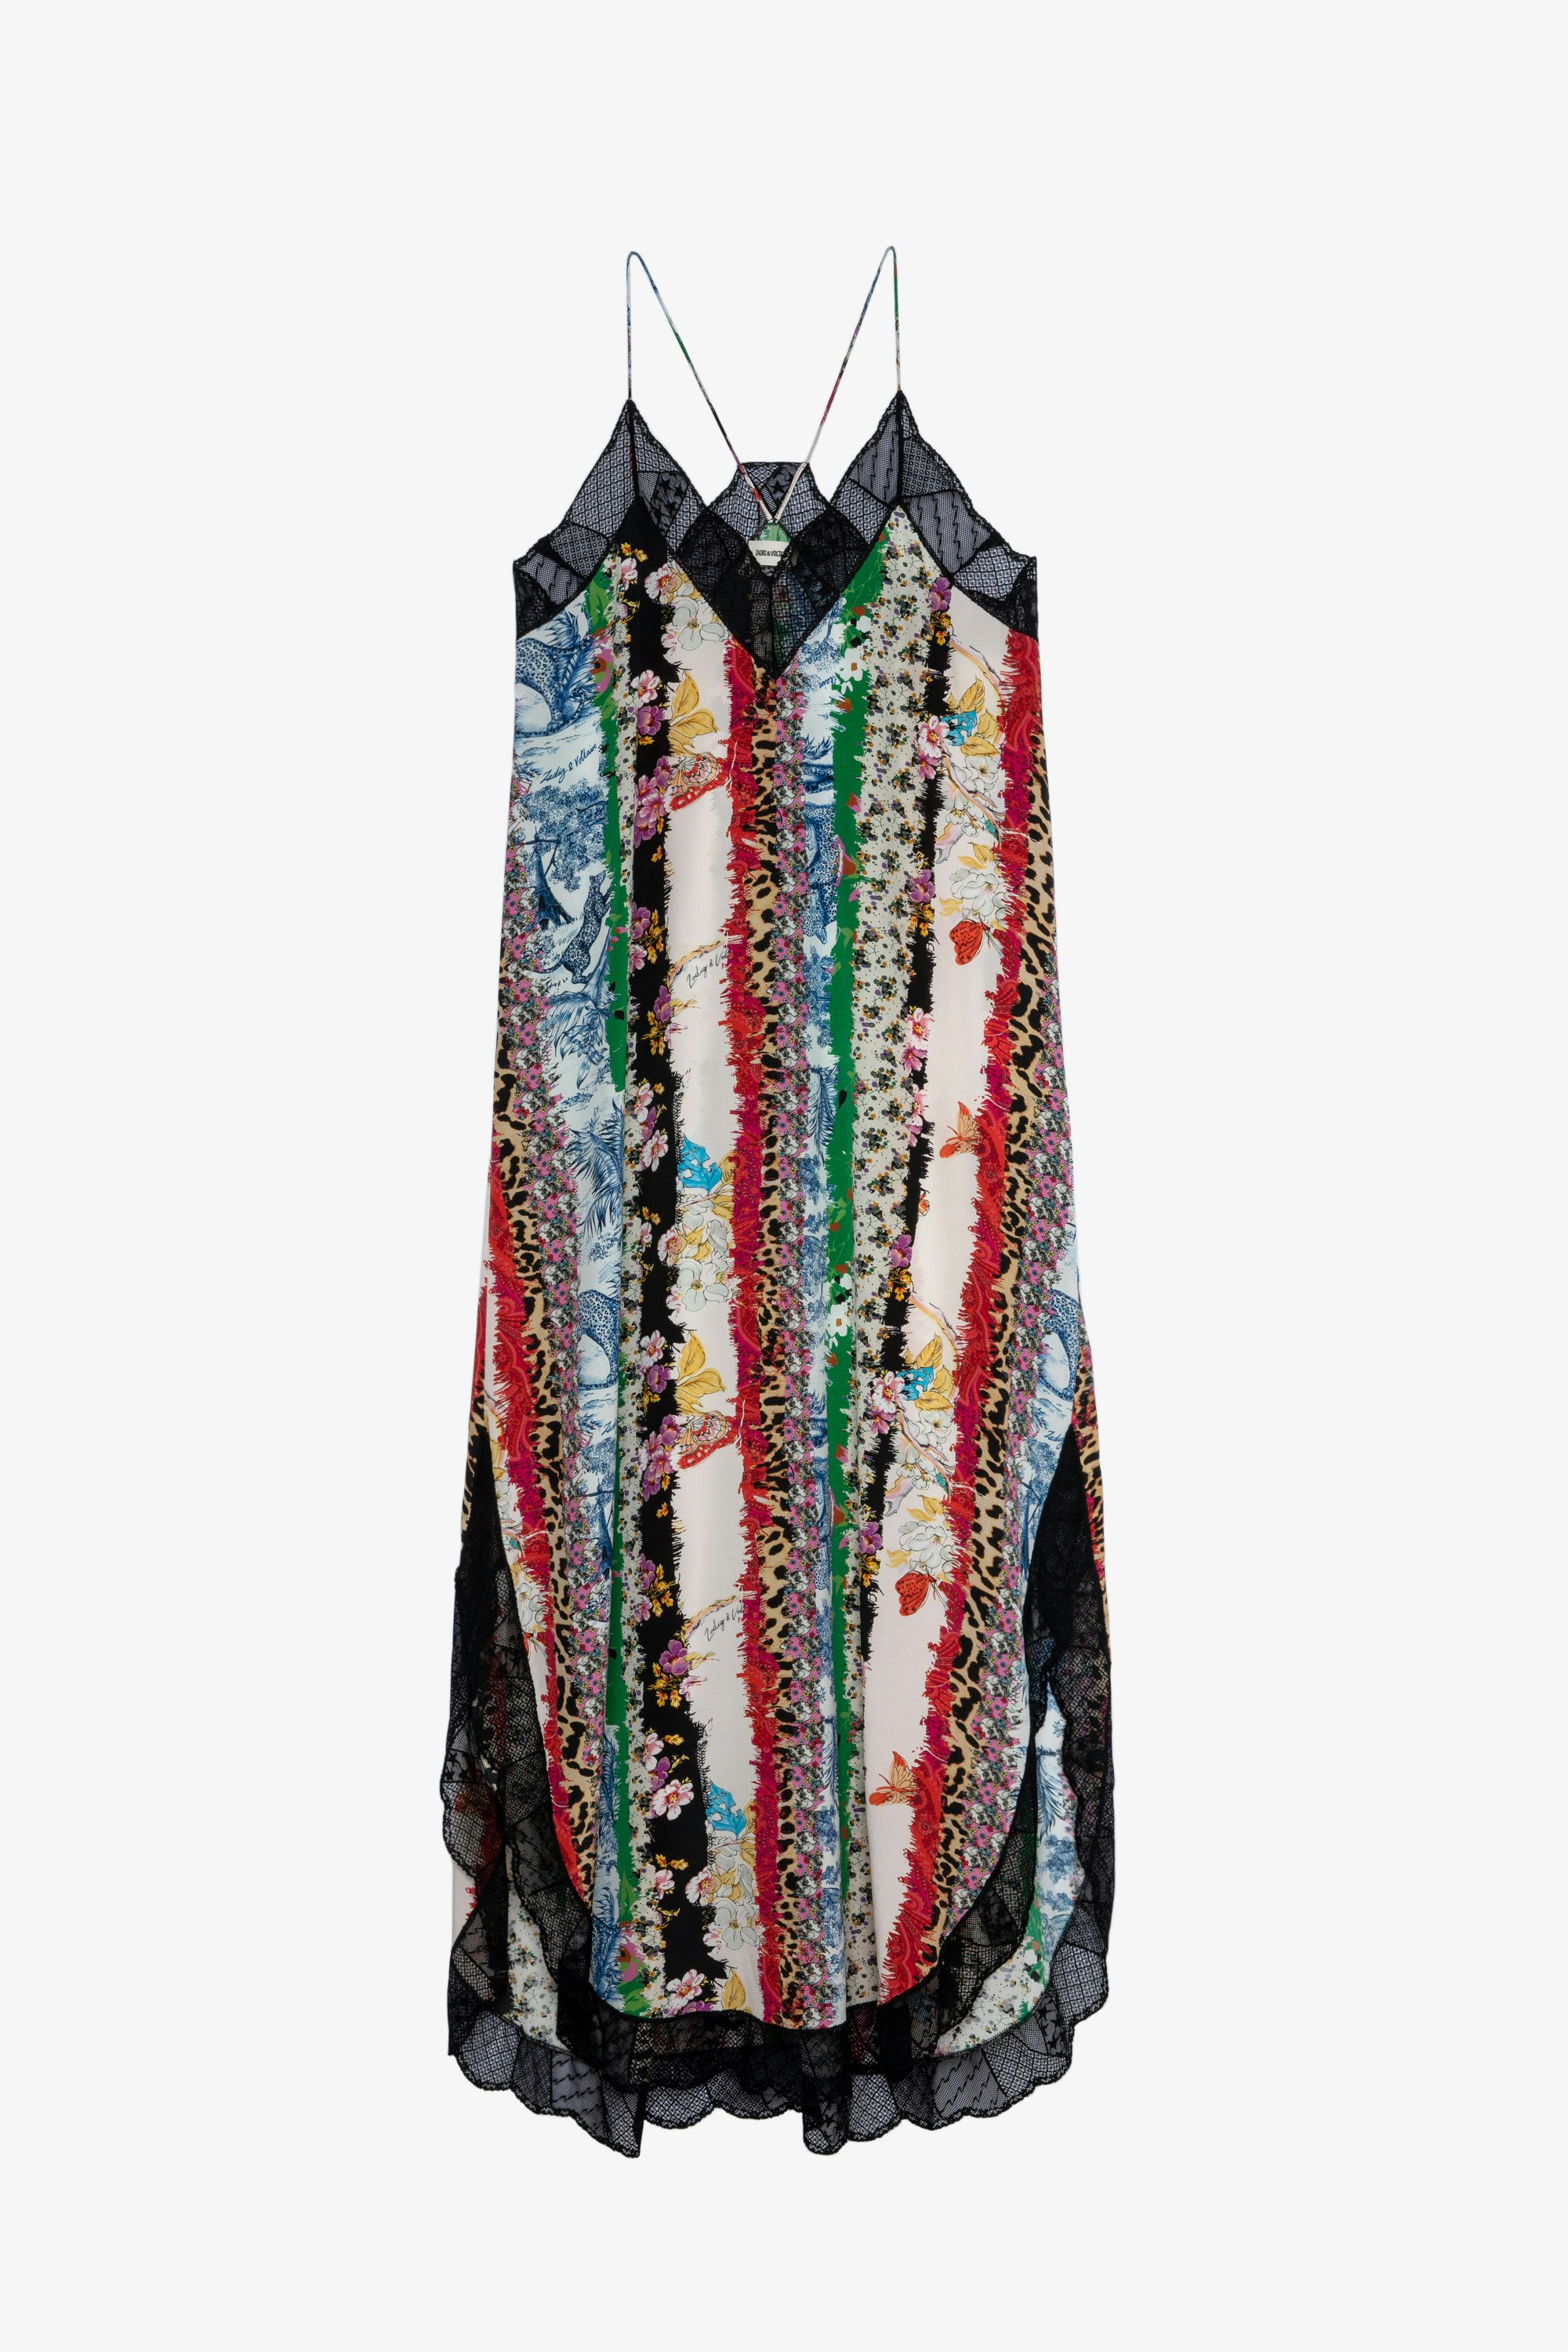 Mixed Print Ristyl ワンピース Women’s long dress with thin straps and prints